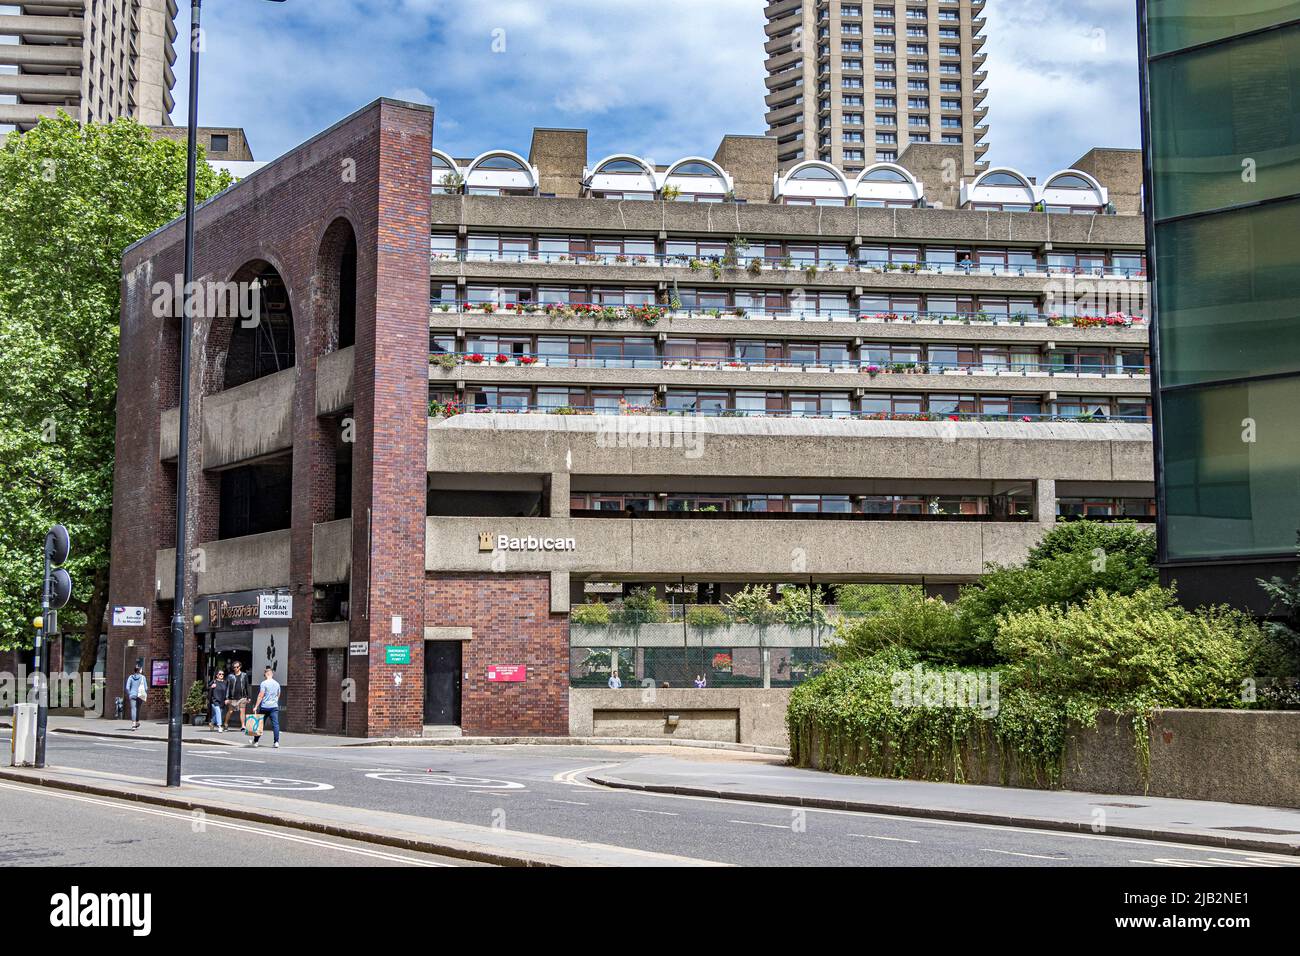 Flowers adorn the terraces of one of the terrace blocks of the Barbican Estate in The City Of London , EC2 Stock Photo